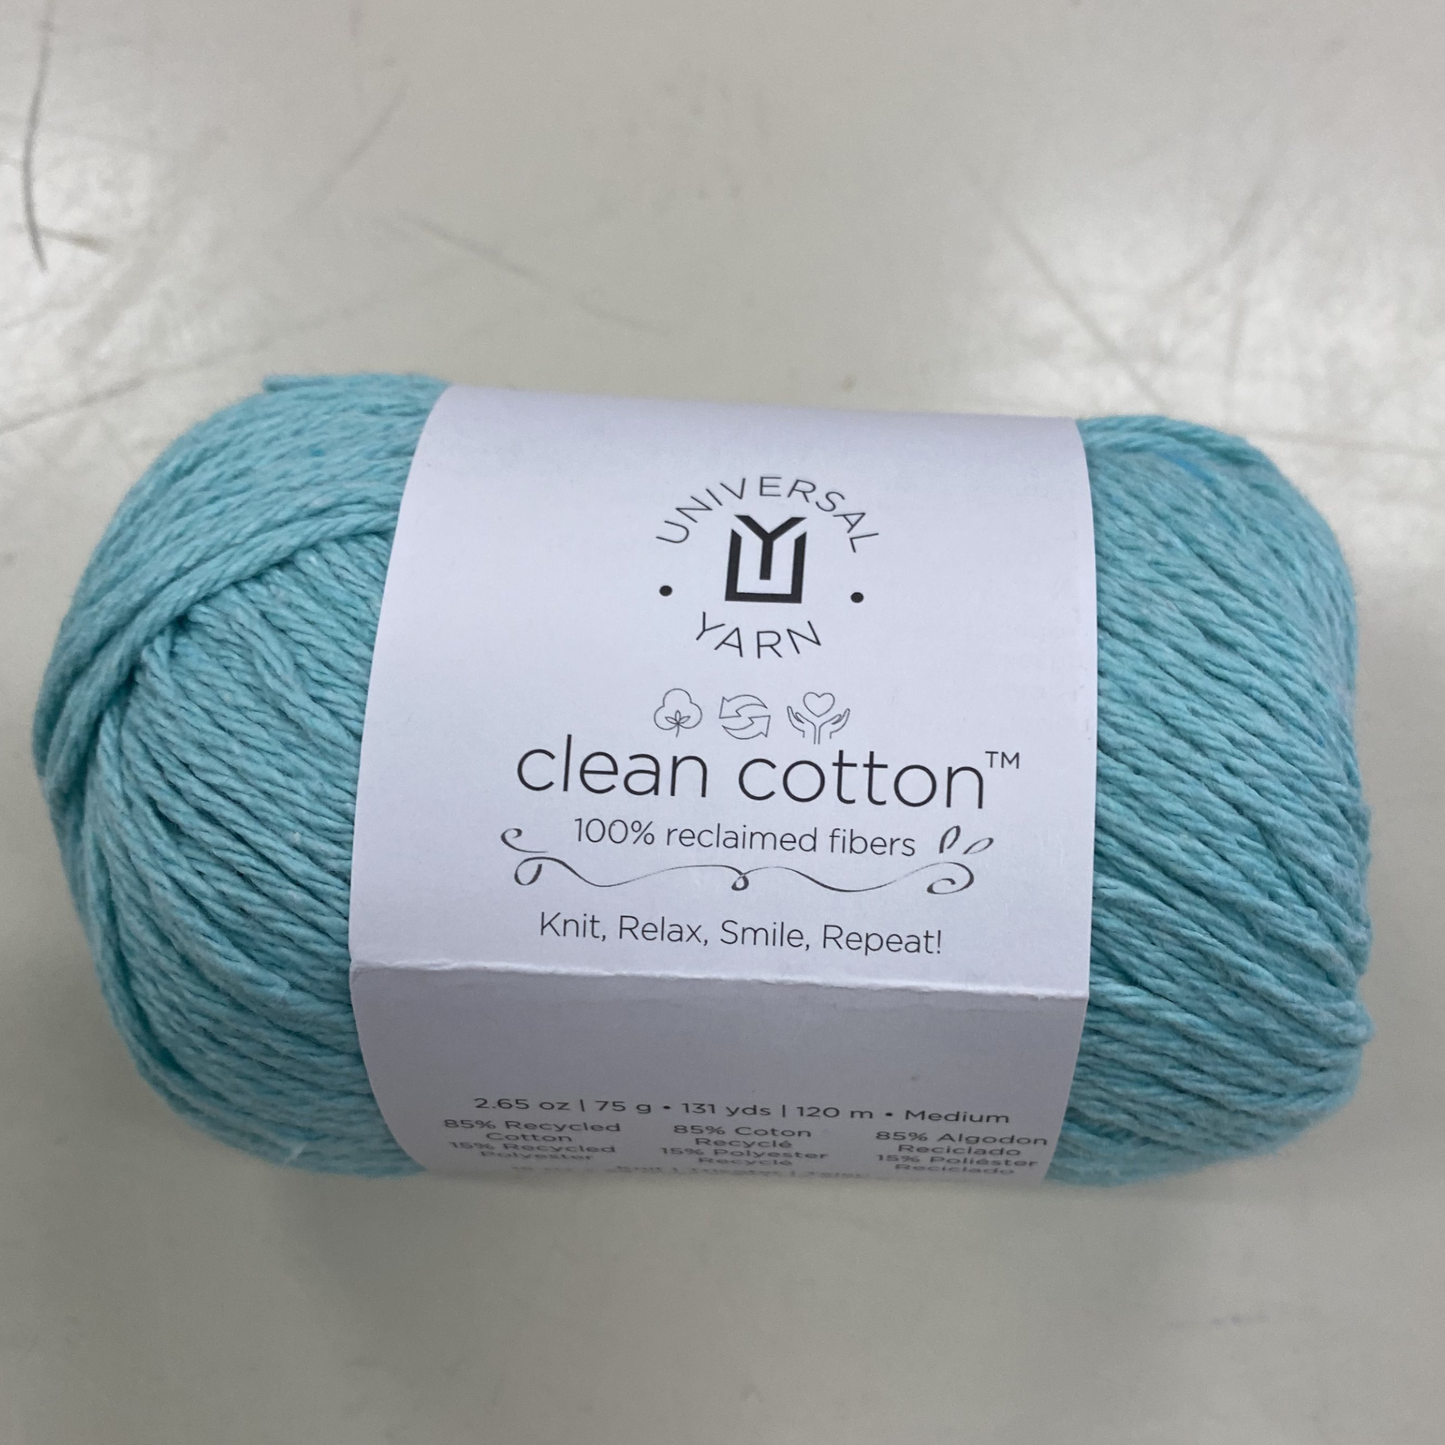 Universal Yarn - Clean Cotton Solid 85% Recycled Cotton, 15% Recycled Polyester